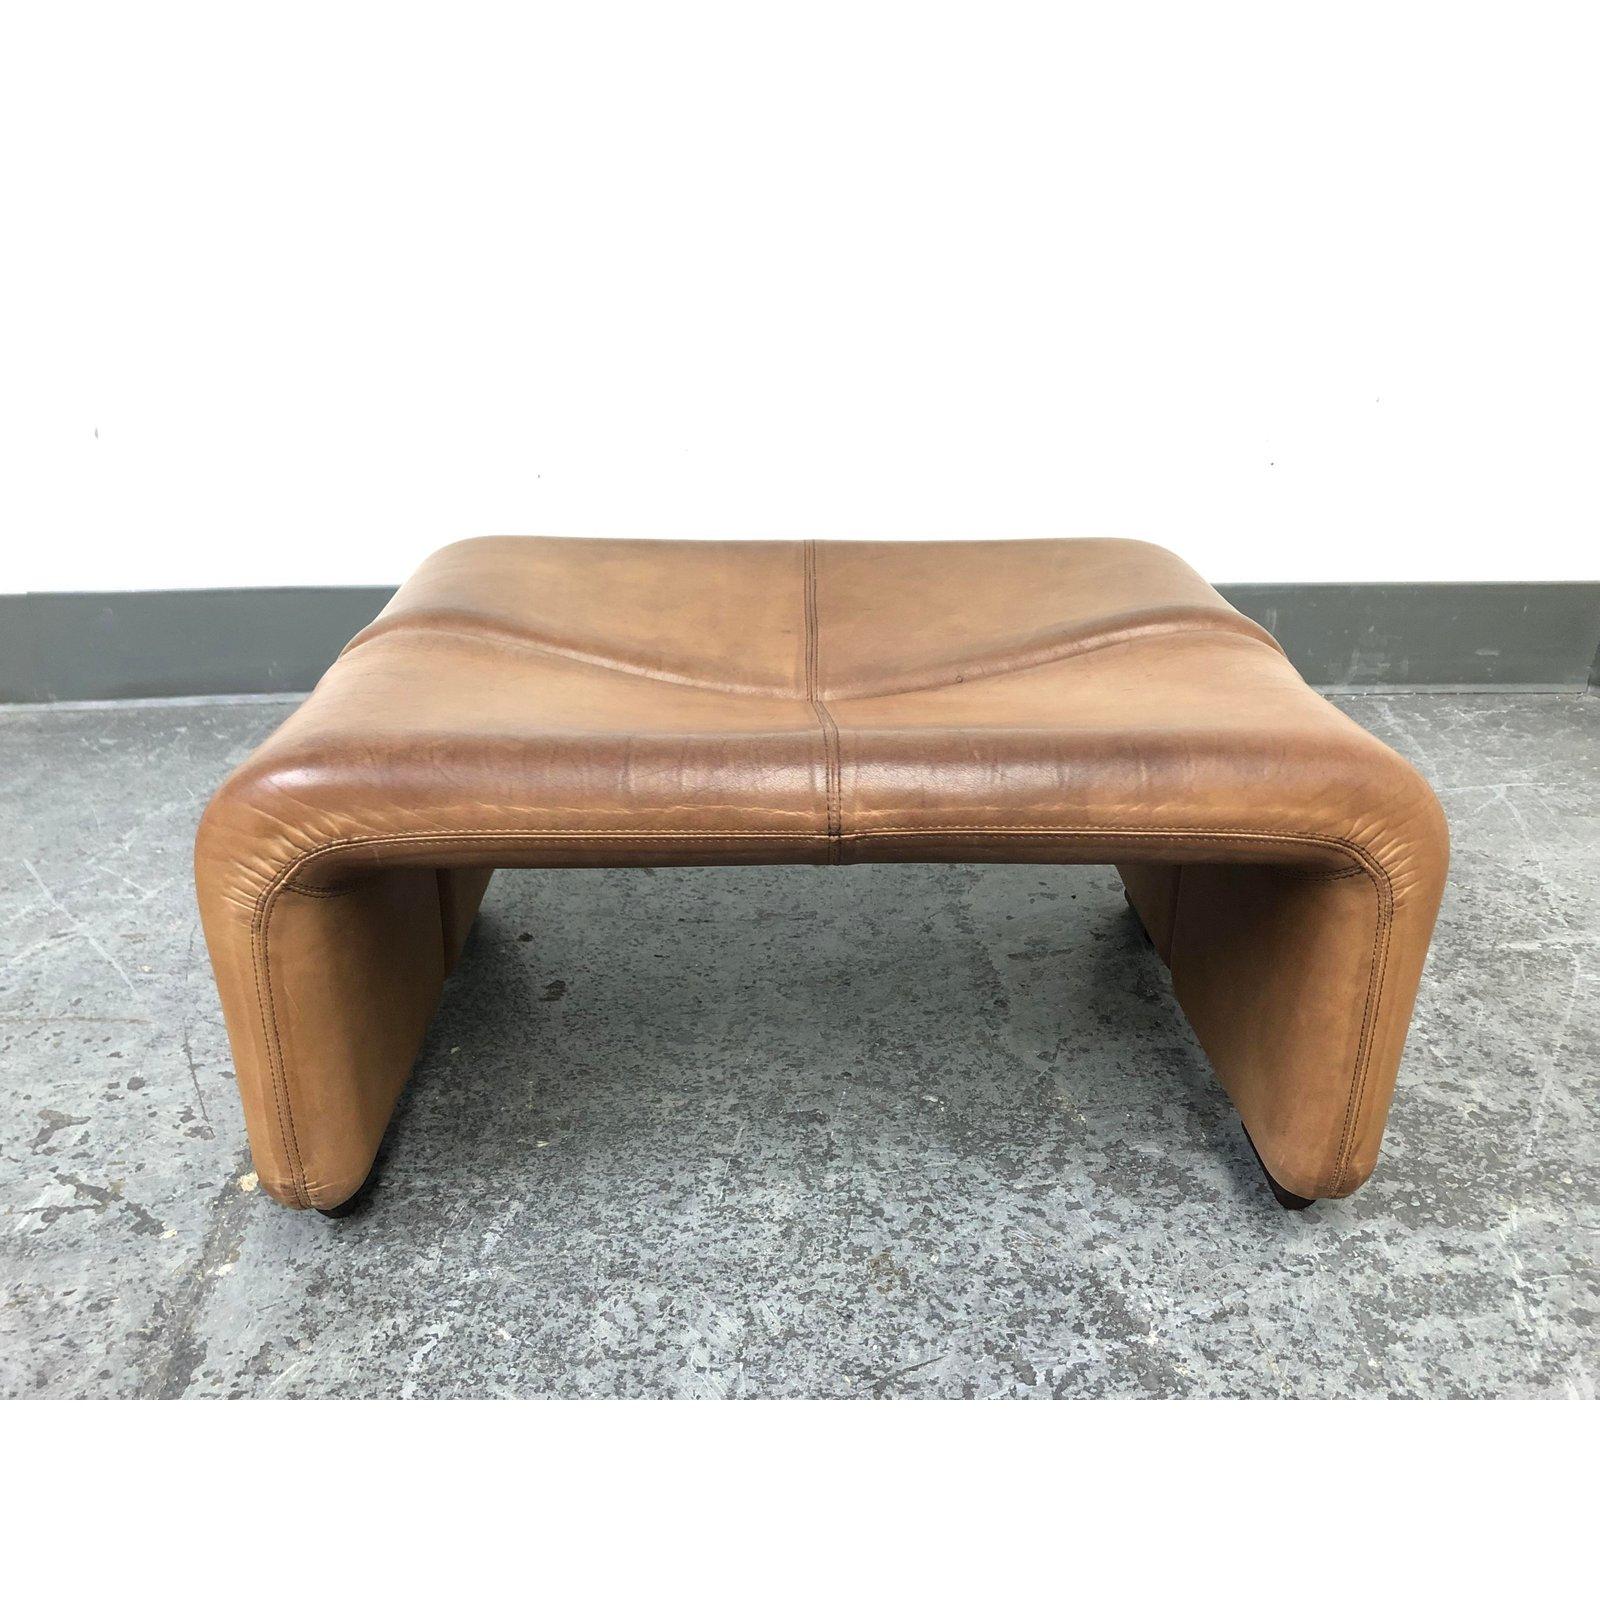 A B&B Italia Coronado Alto leather ottoman. Designed by Tobia and Afra Scarpa in 1966. Originally purchased in the 1980s. Upholstered in original thick cognac leather. Natural distress to the item. The middle surface is slanted, comfortable to